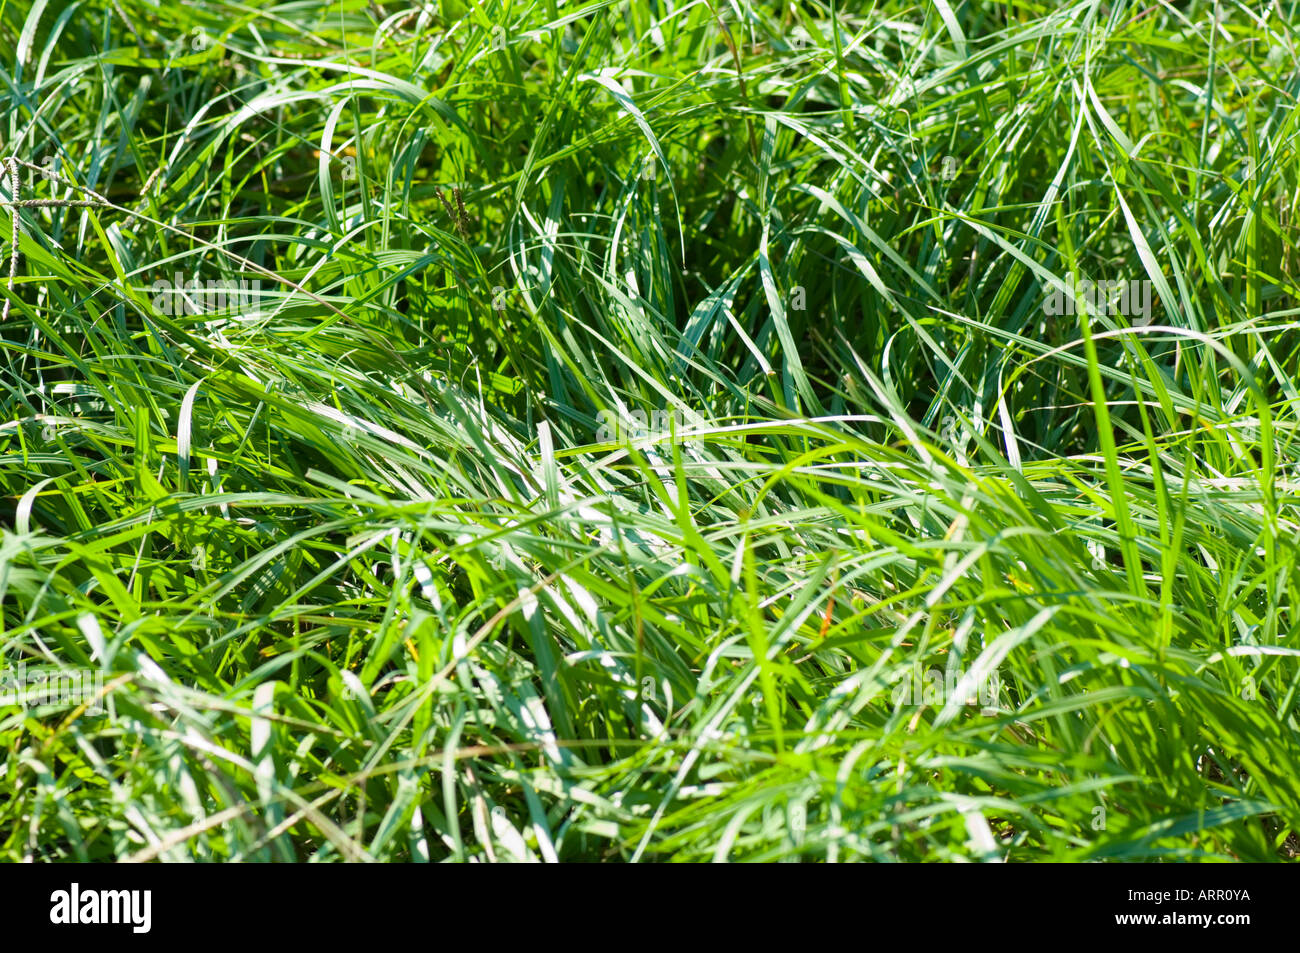 Florida farm field with wild green ground cover Stock Photo